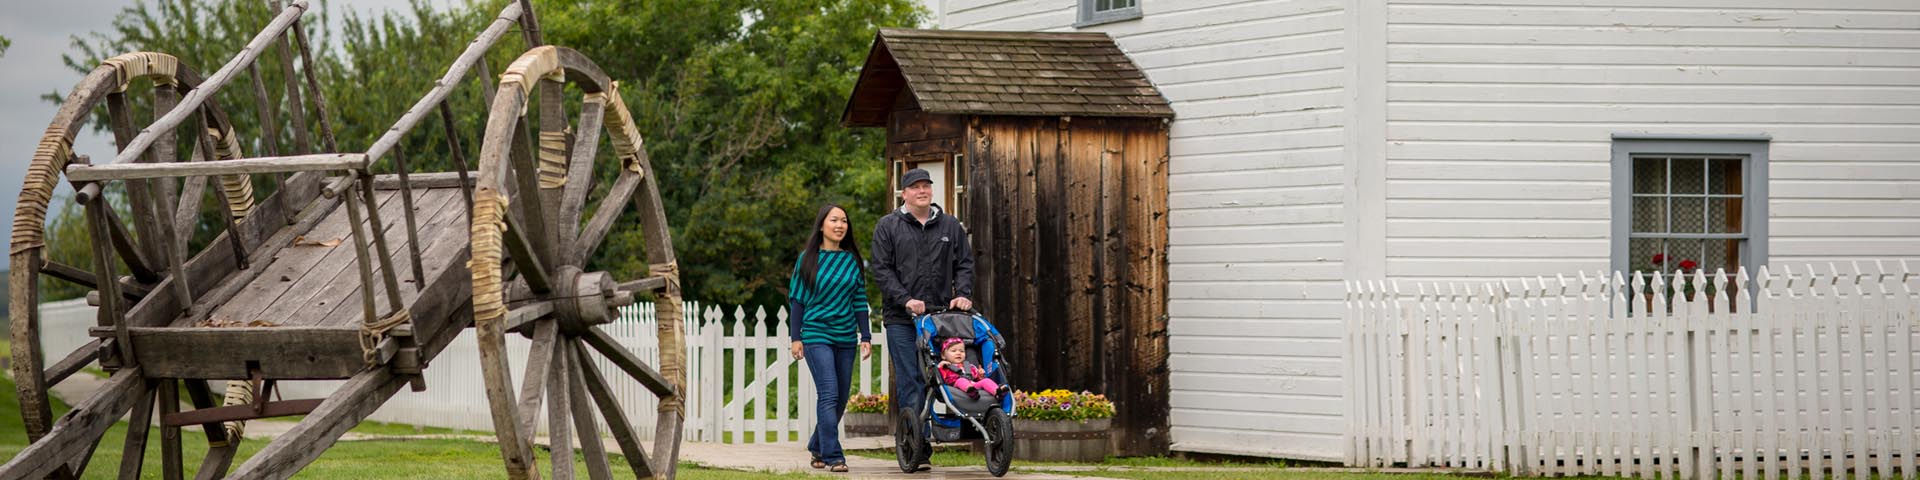 Two adults with a stroller walking along the boardwalk by the church and rectory at Batoche National Historic Site.